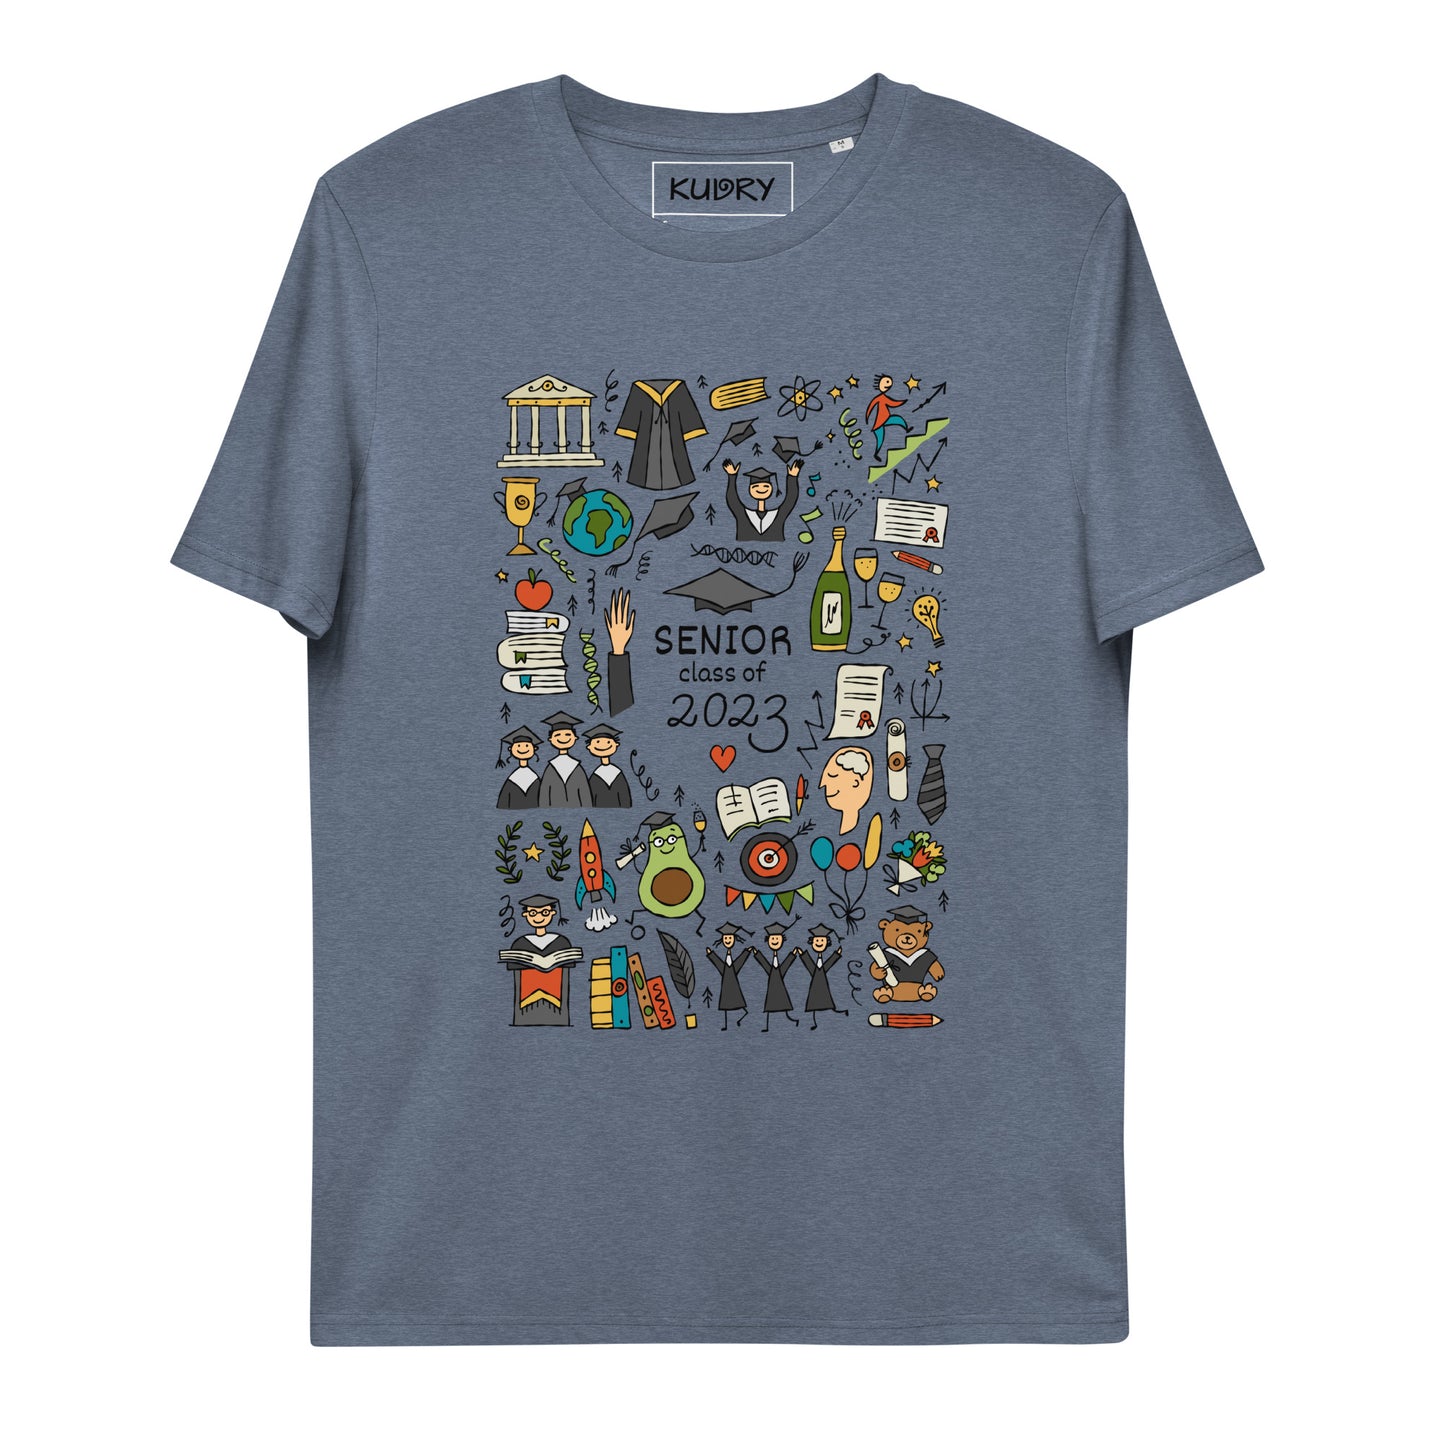 Personalised graduation 2023 blue t-shirt with funny designer print featuring graduates in hats and mantles, holiday-themed motifs, and a graduation teddy bear. 